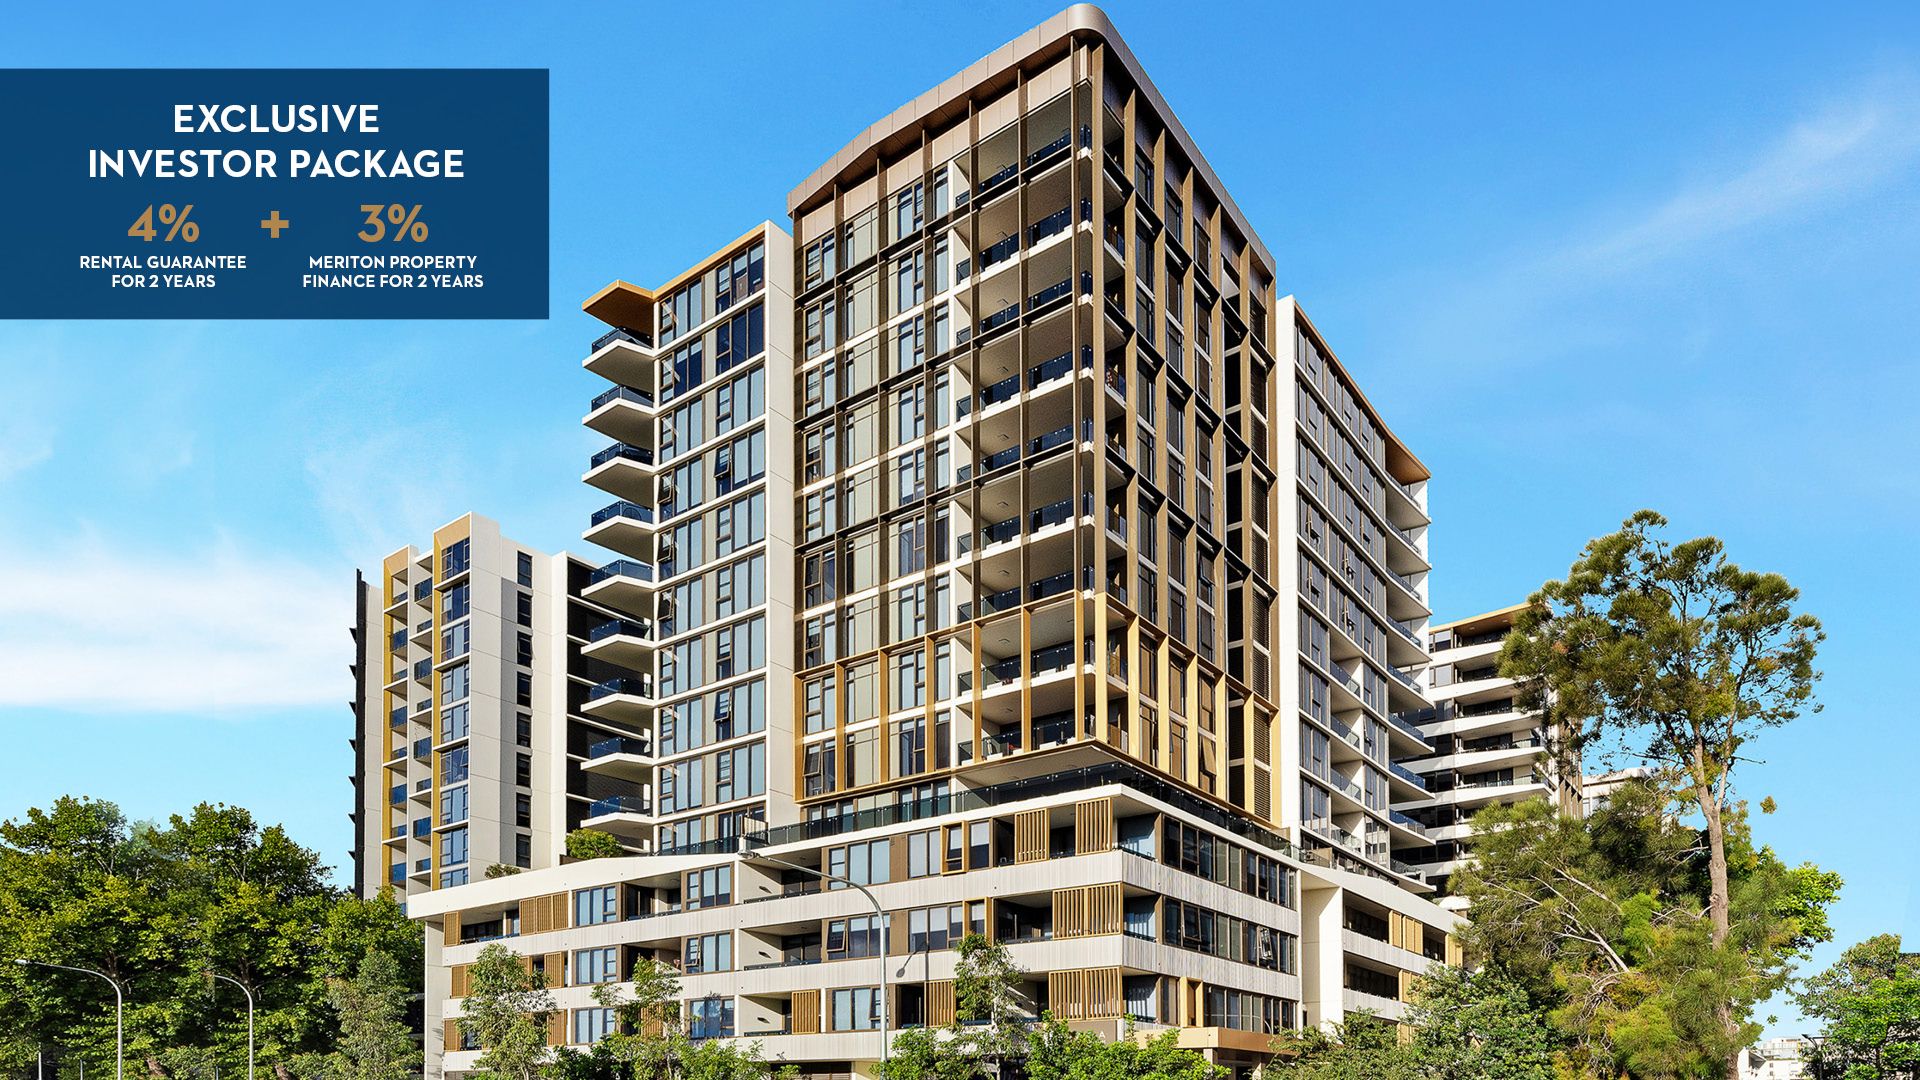 1 bedrooms New Apartments / Off the Plan in 12 Galloway MASCOT NSW, 2020